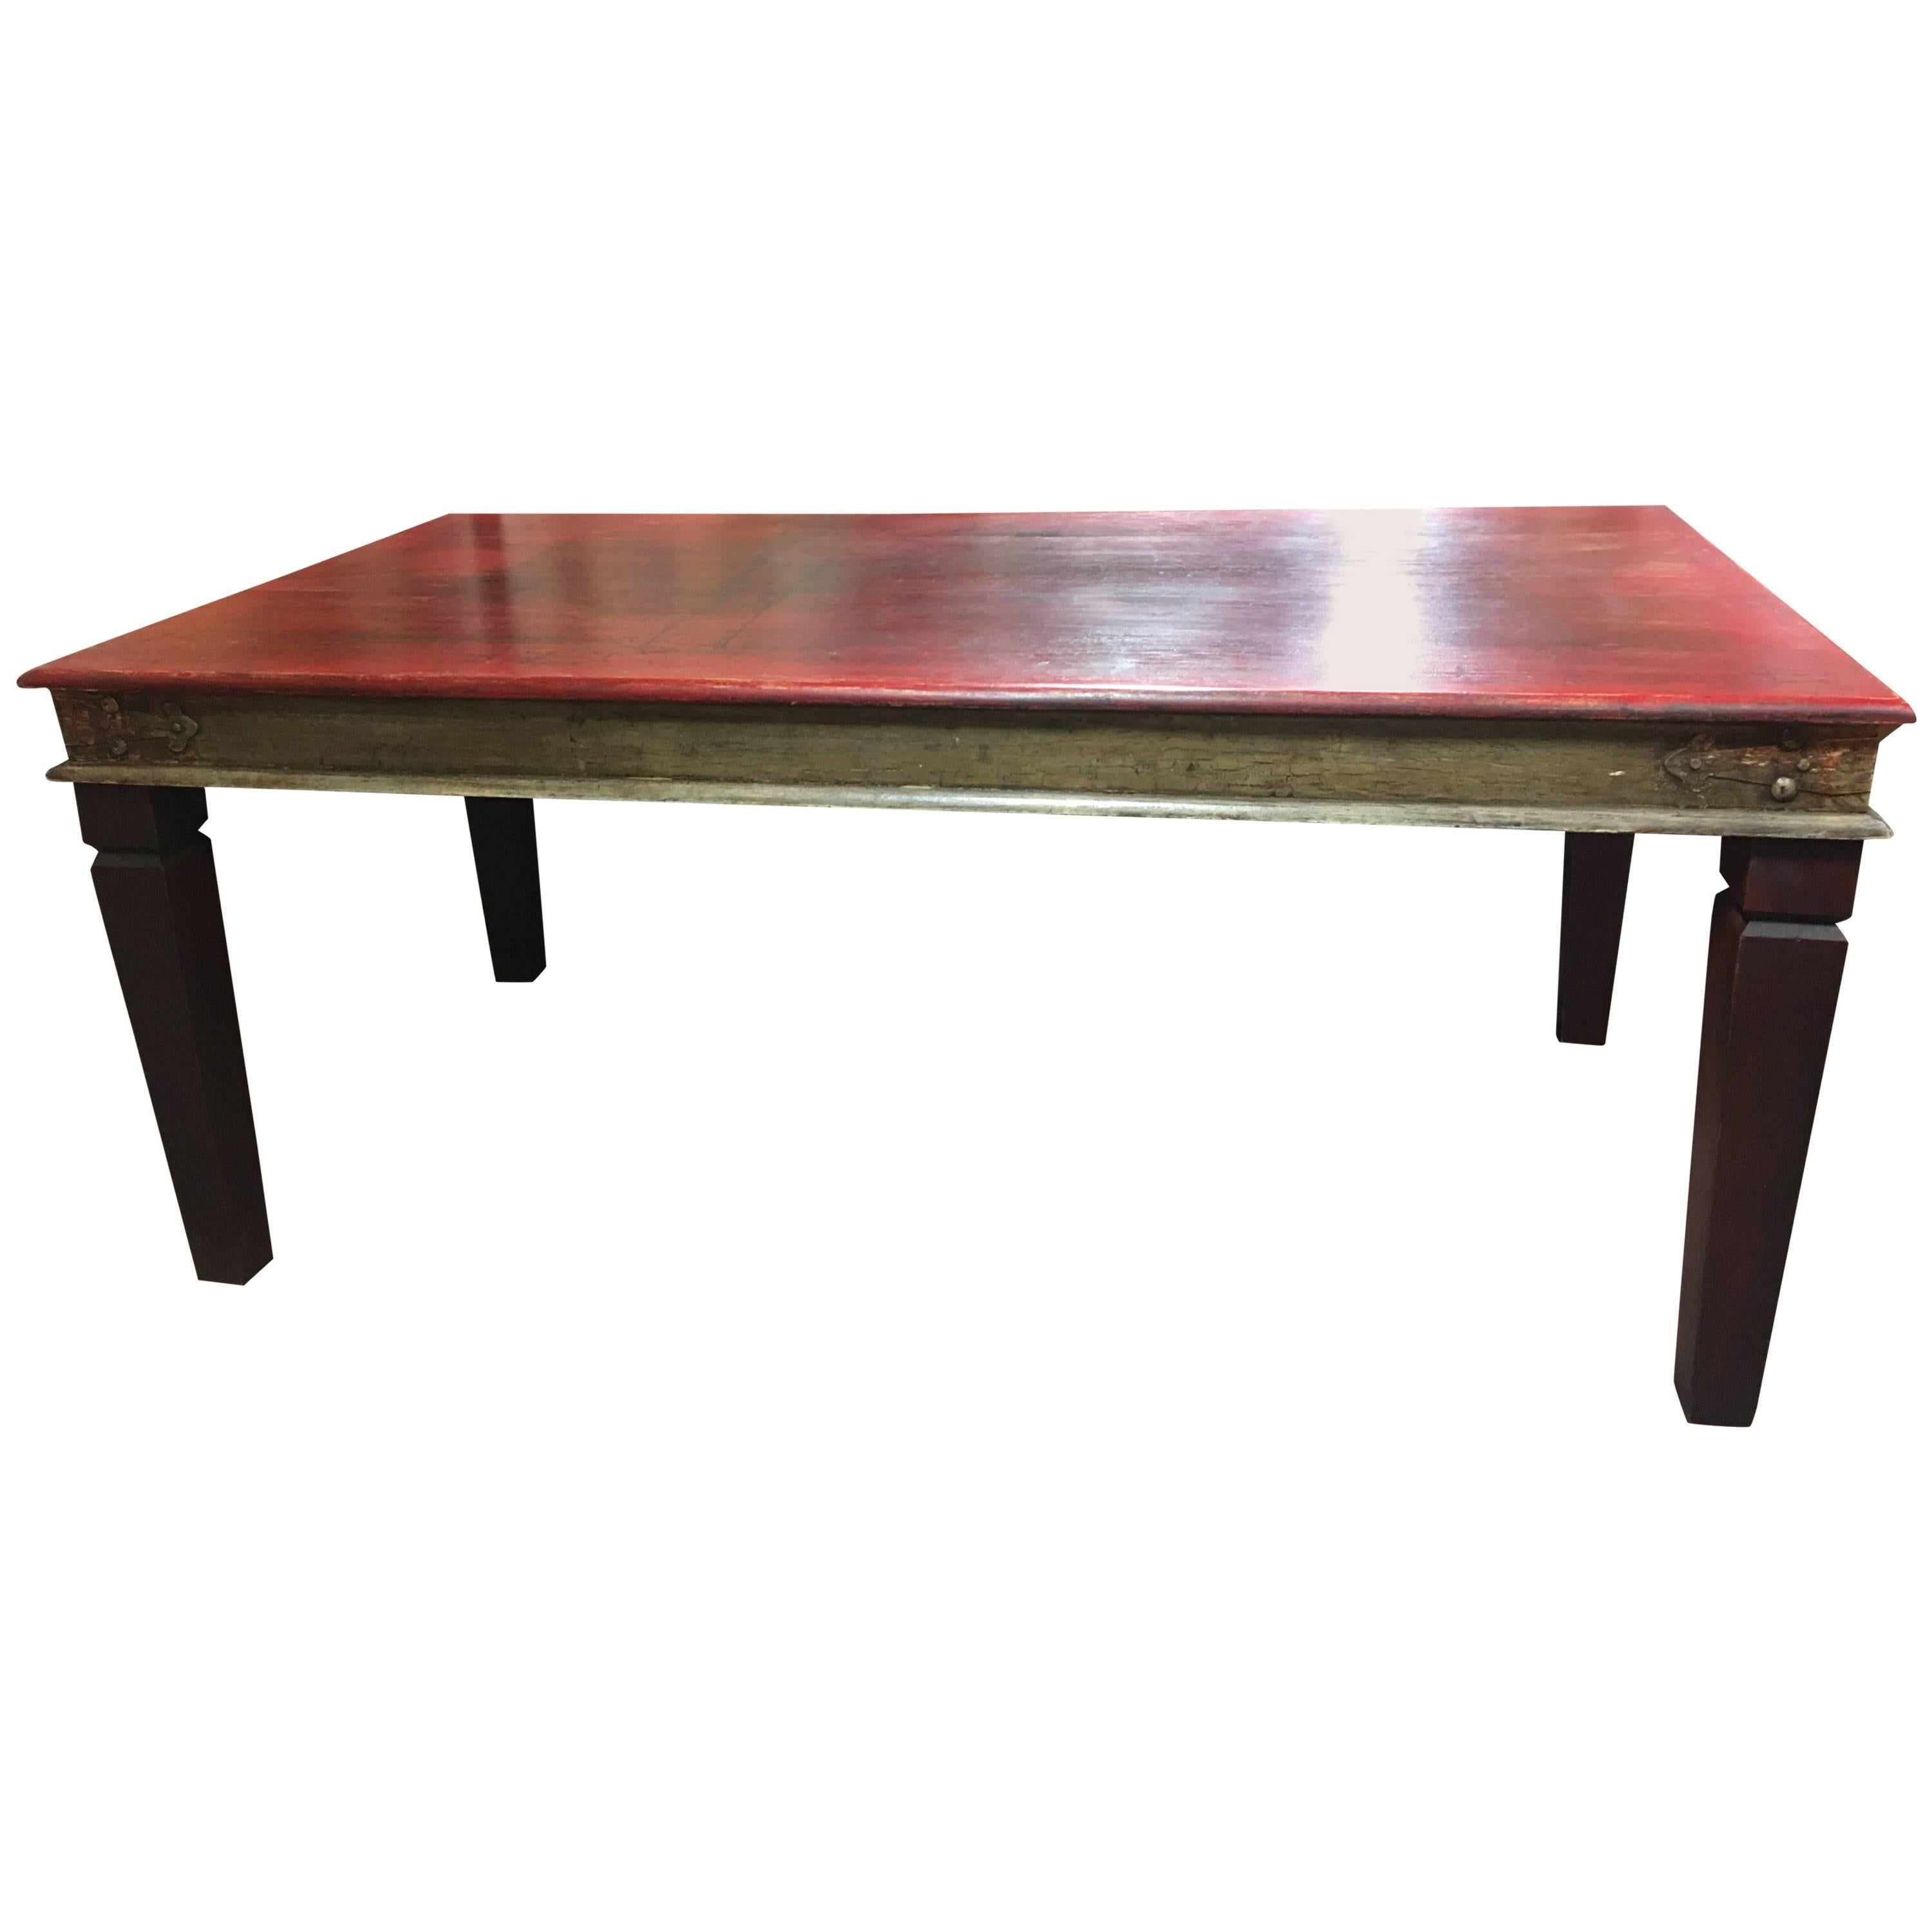  ON SALE  Table Dining Period Art Deco Center Table 35.5''d x 71''w x 30.5''h For Sale